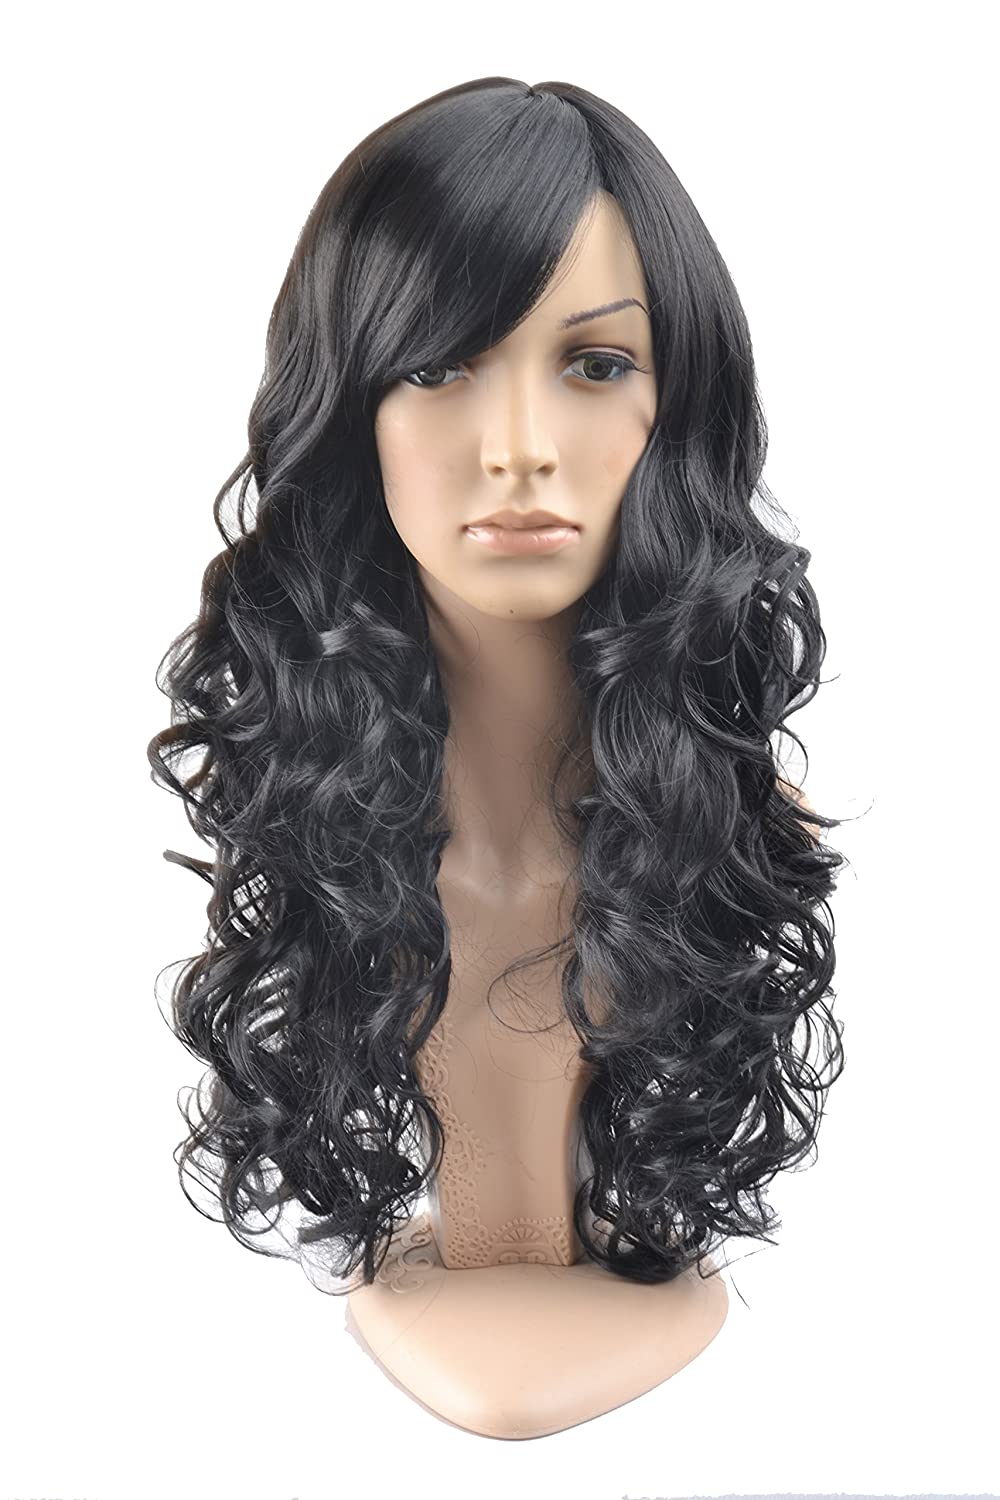 Price:$9.99    BERON 24" Stylish Long Curly Black Hair Wig Party Perruque (Black)  Beauty